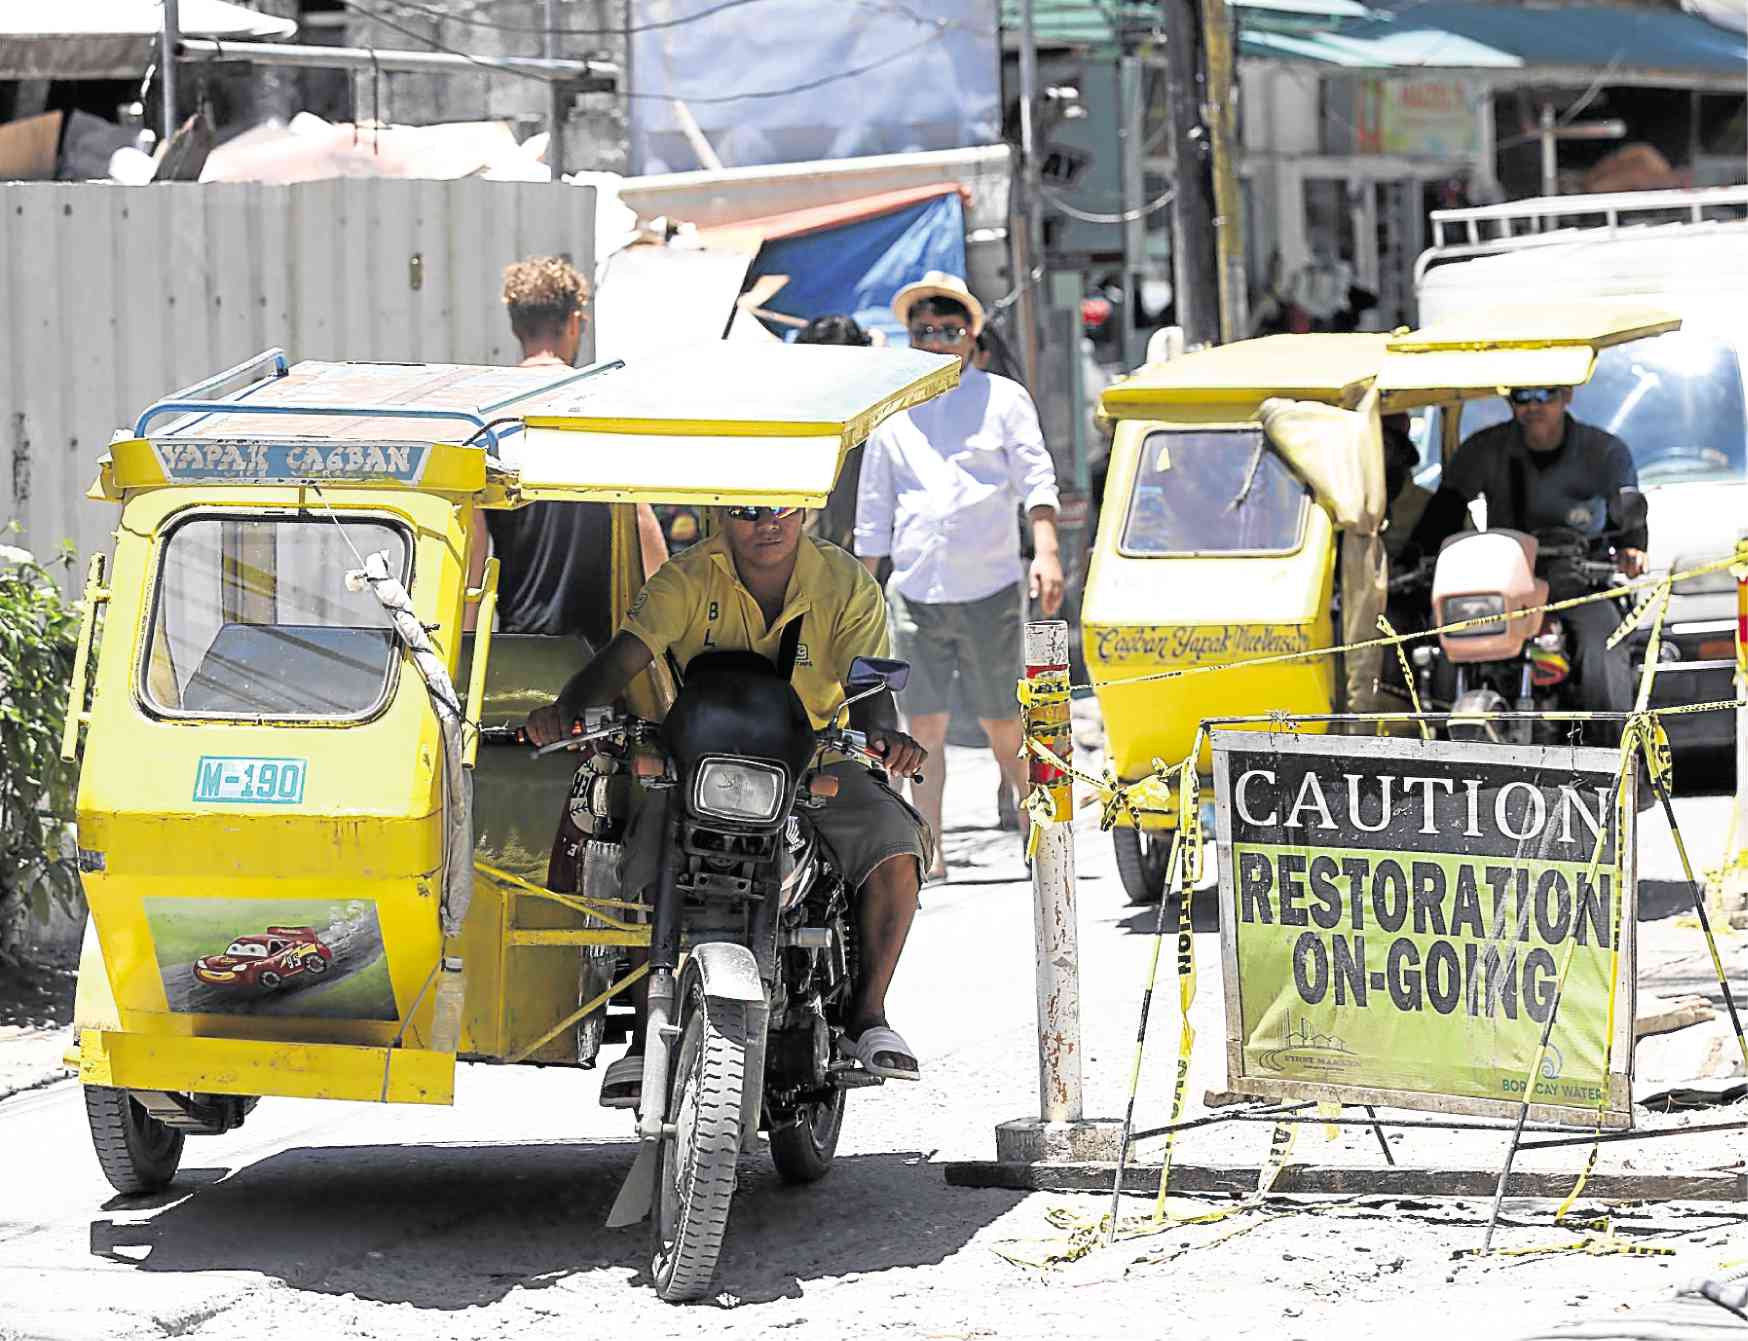 Town execs running Boracay get gas-fed tricycles off streets